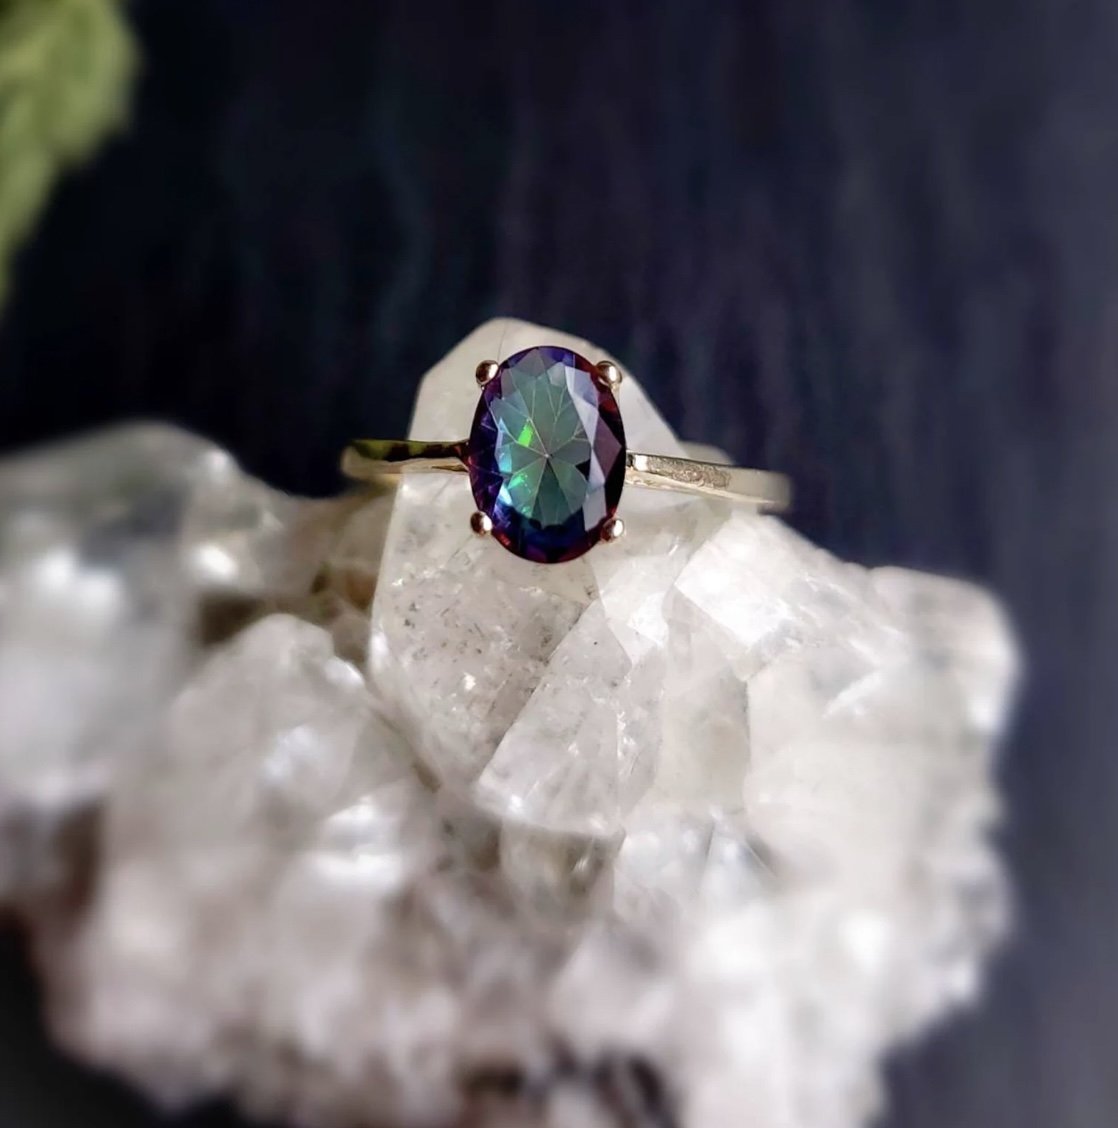 What Is June's Birthstone?